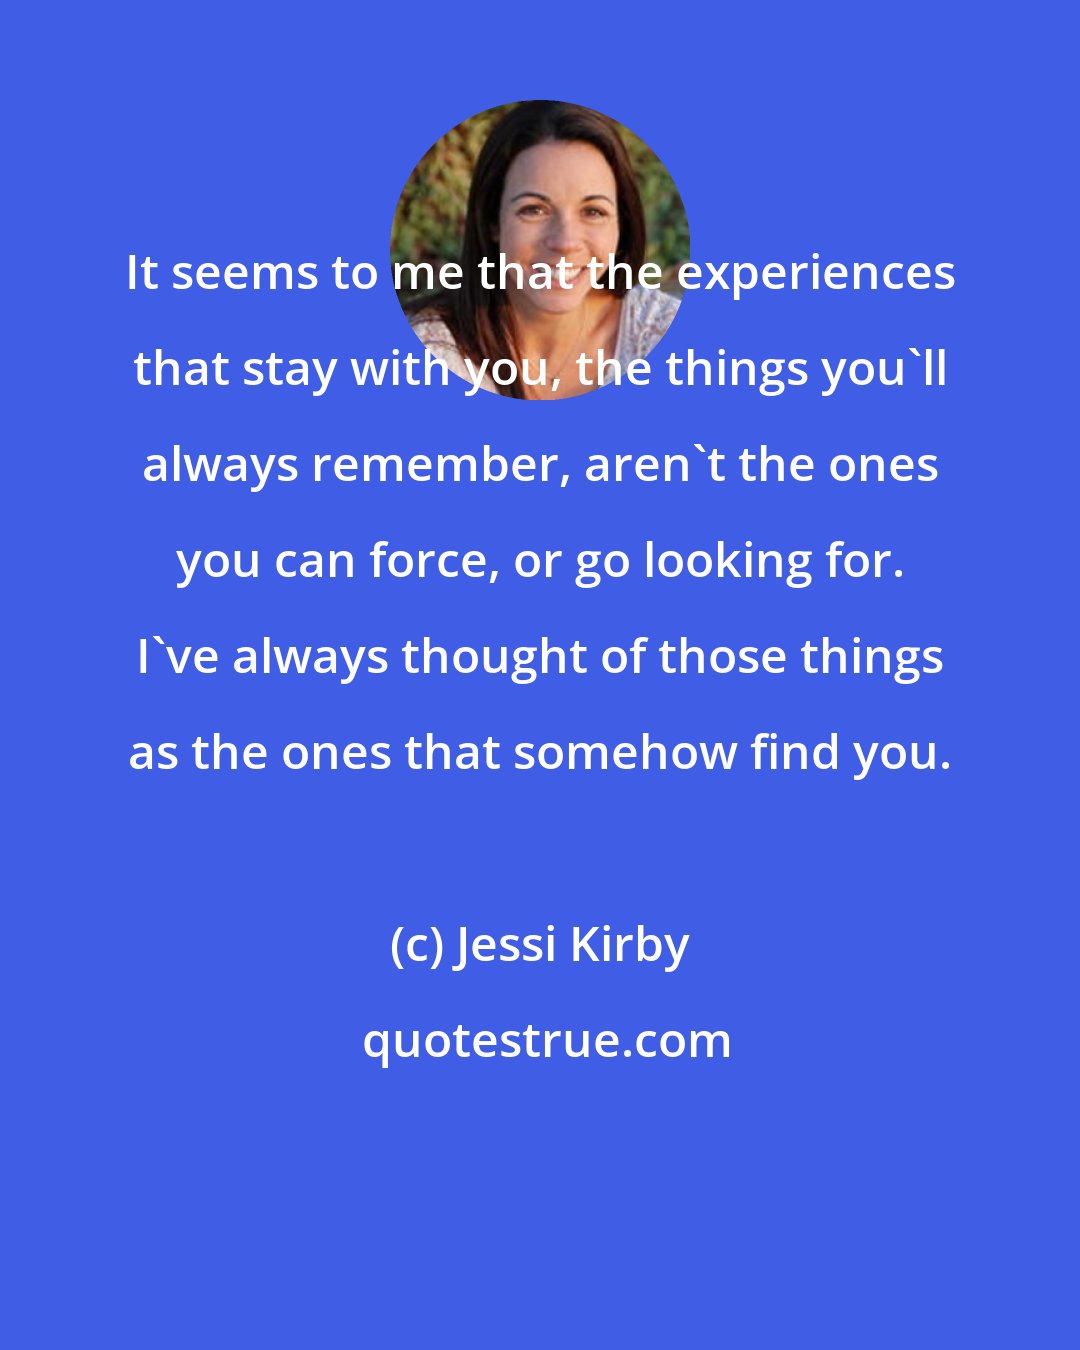 Jessi Kirby: It seems to me that the experiences that stay with you, the things you'll always remember, aren't the ones you can force, or go looking for. I've always thought of those things as the ones that somehow find you.